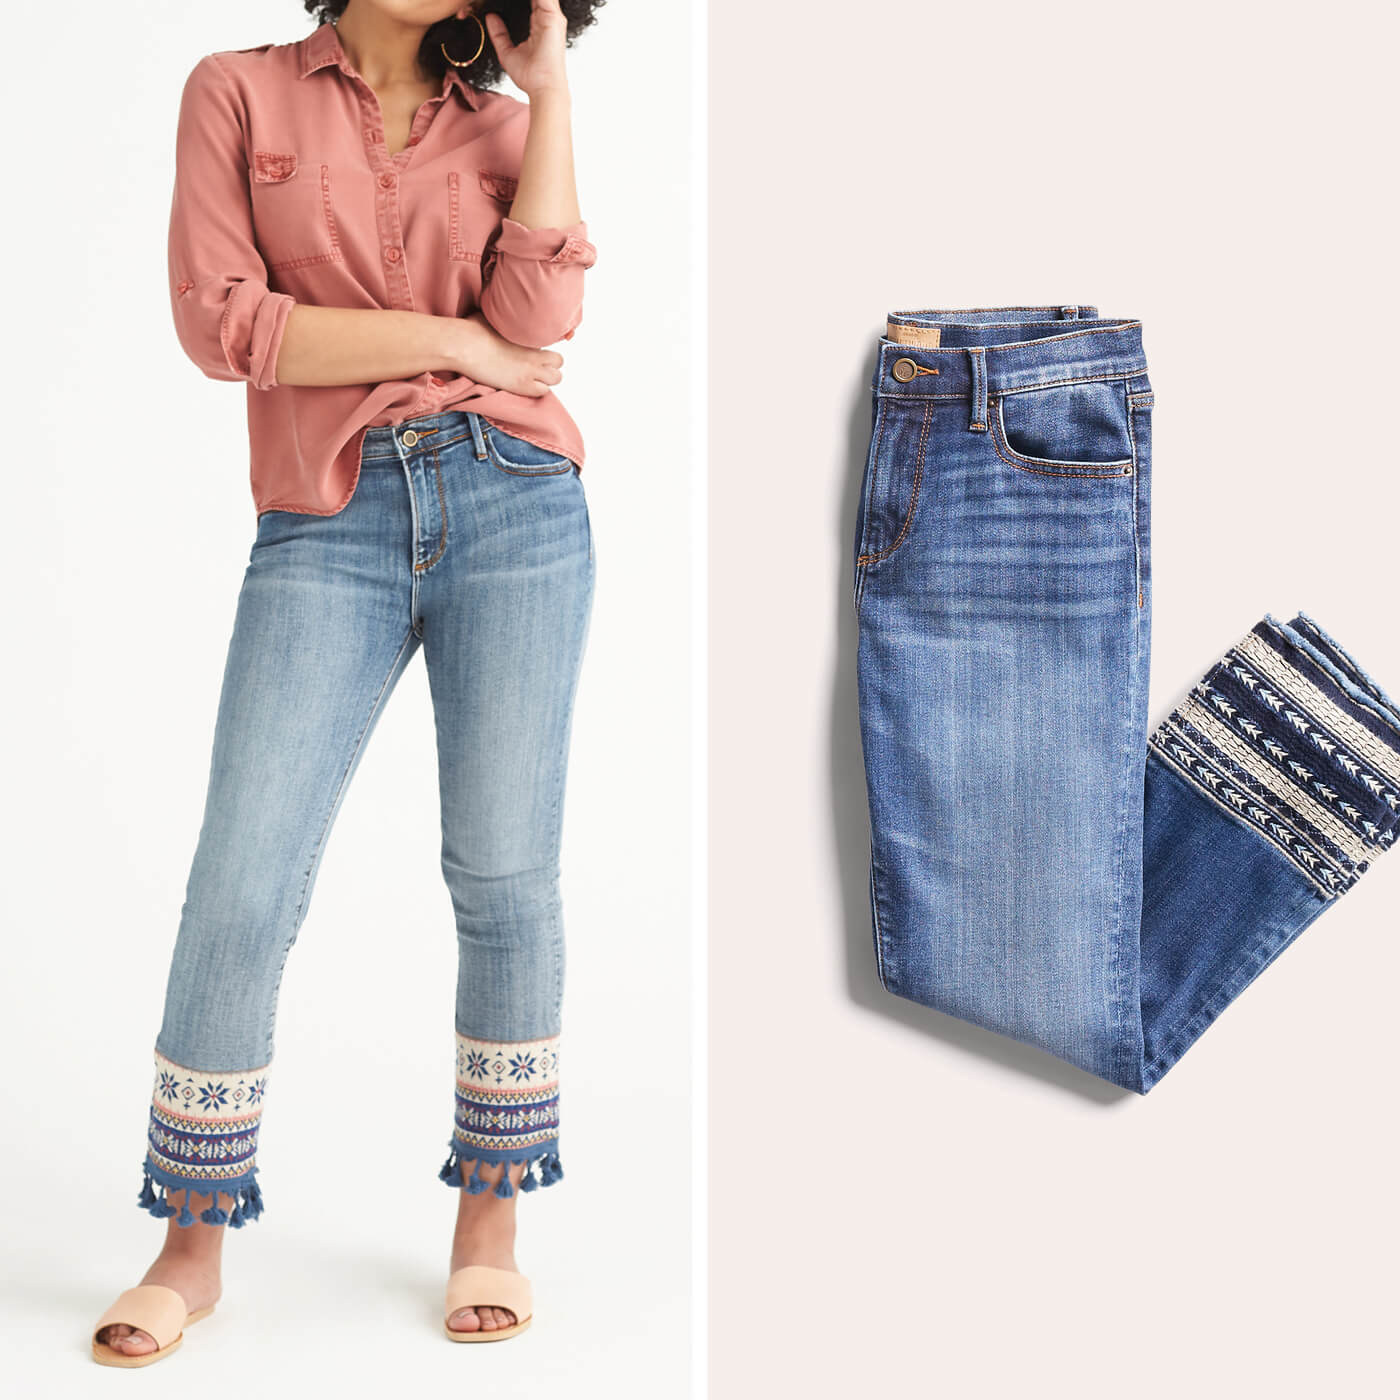 The Petite Woman's Guide to Denim